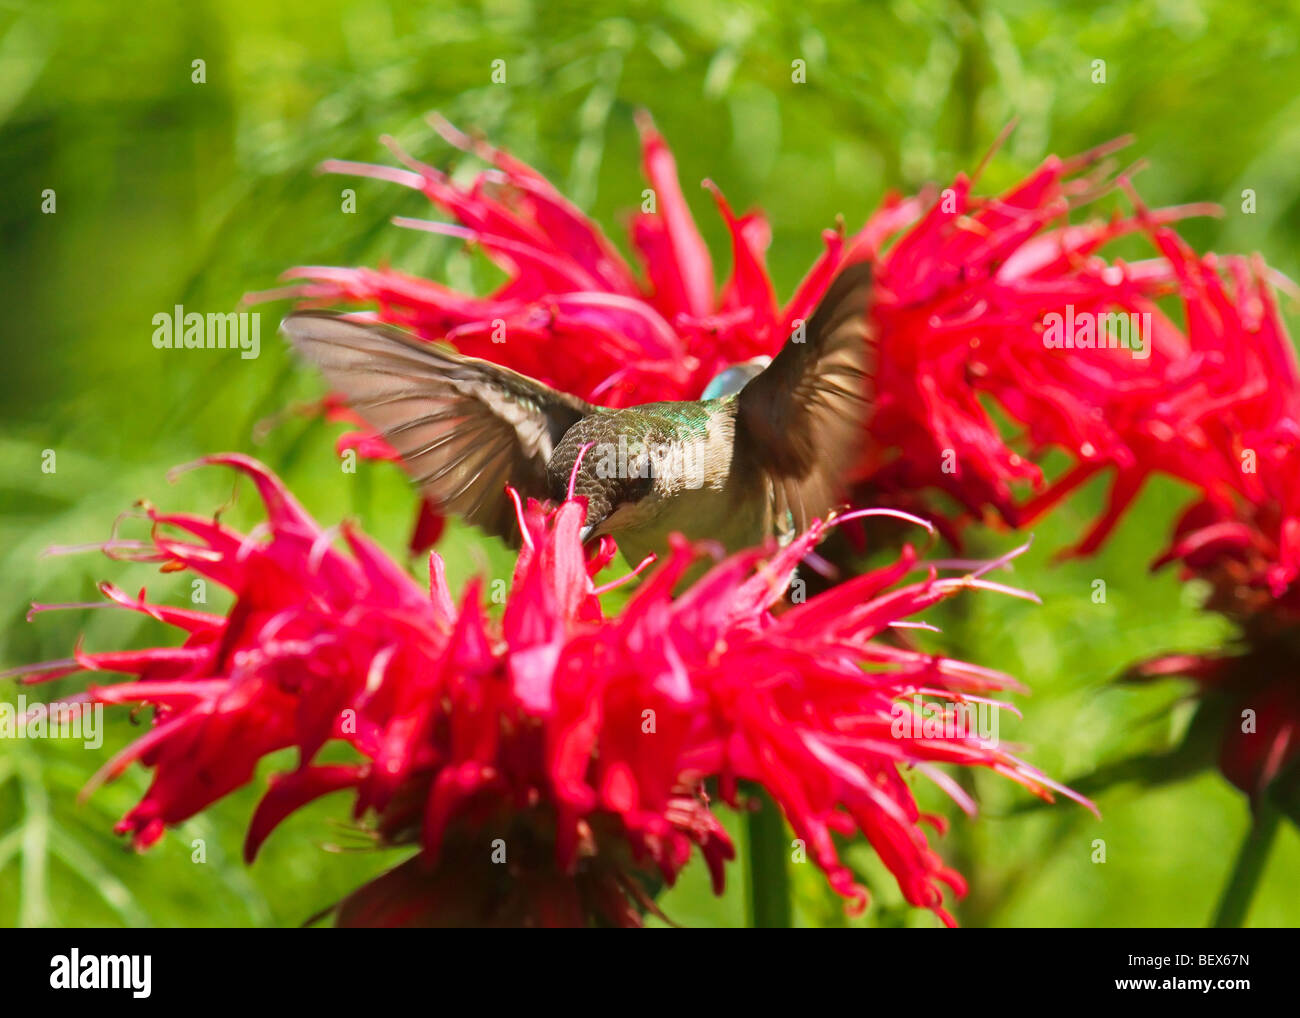 A Ruby-Throated Hummingbird drinking from red Monarda blooms Stock Photo